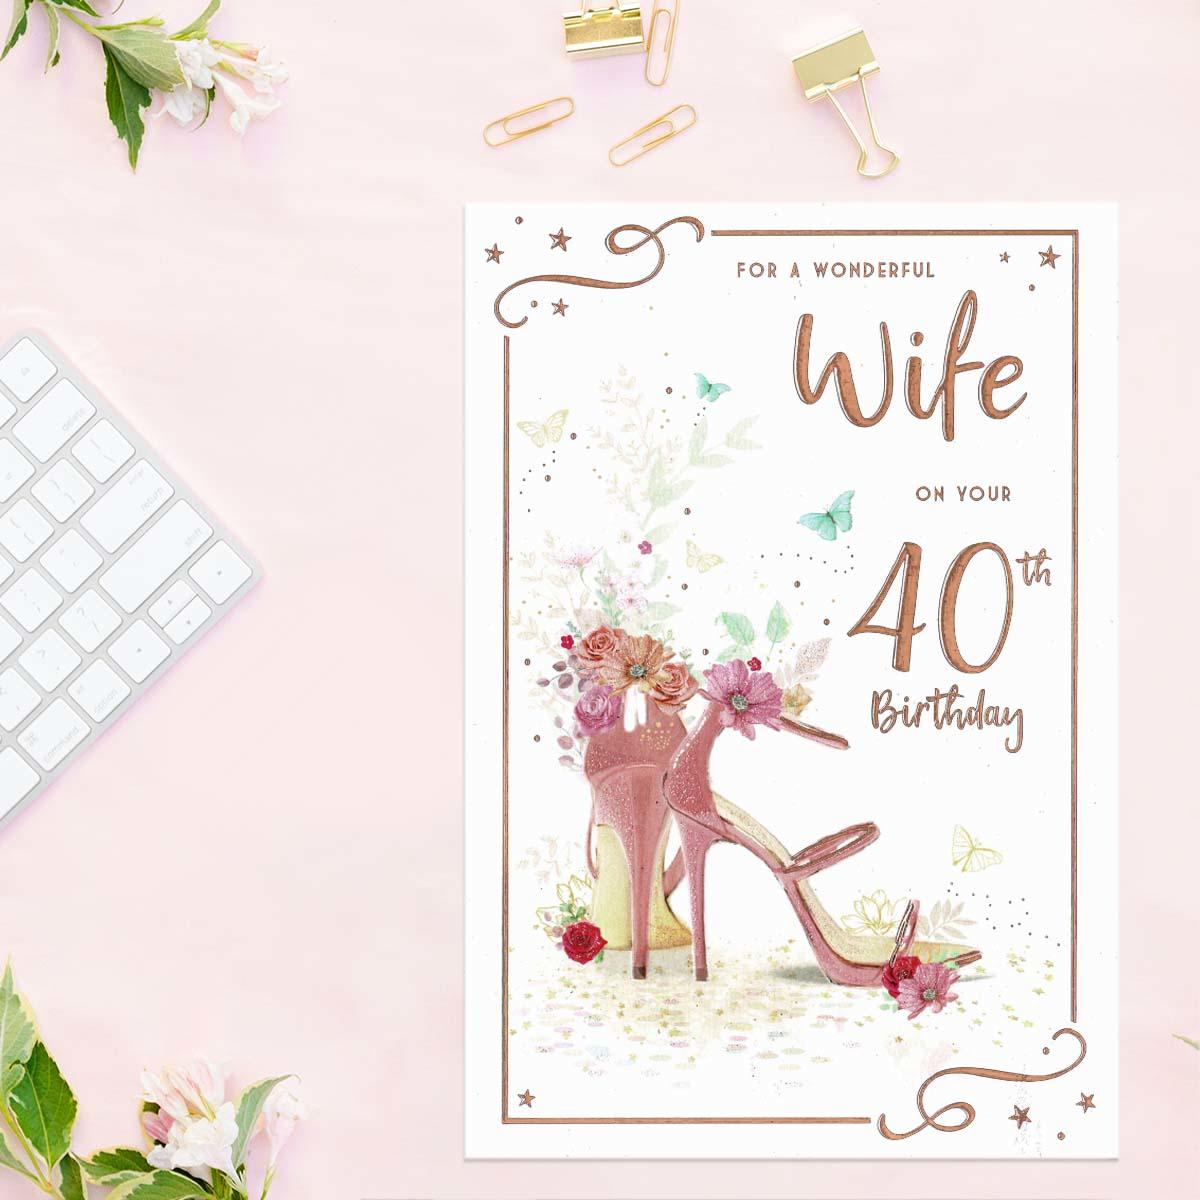 Wonderful Wife On Your 40th birthday card front image